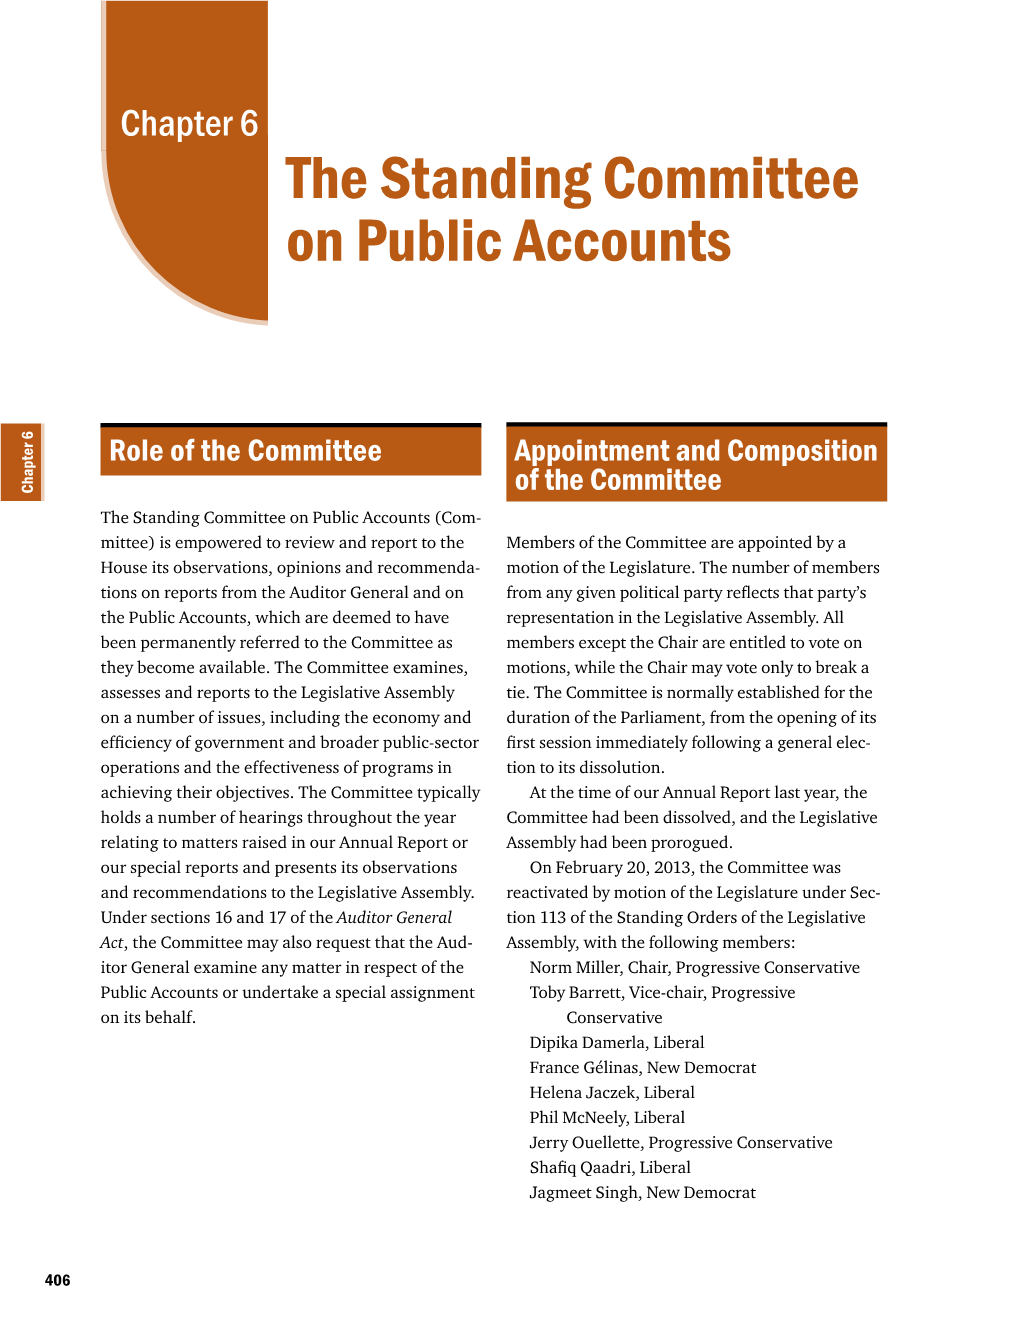 The Standing Committee on Public Accounts Committee the Standing - 407